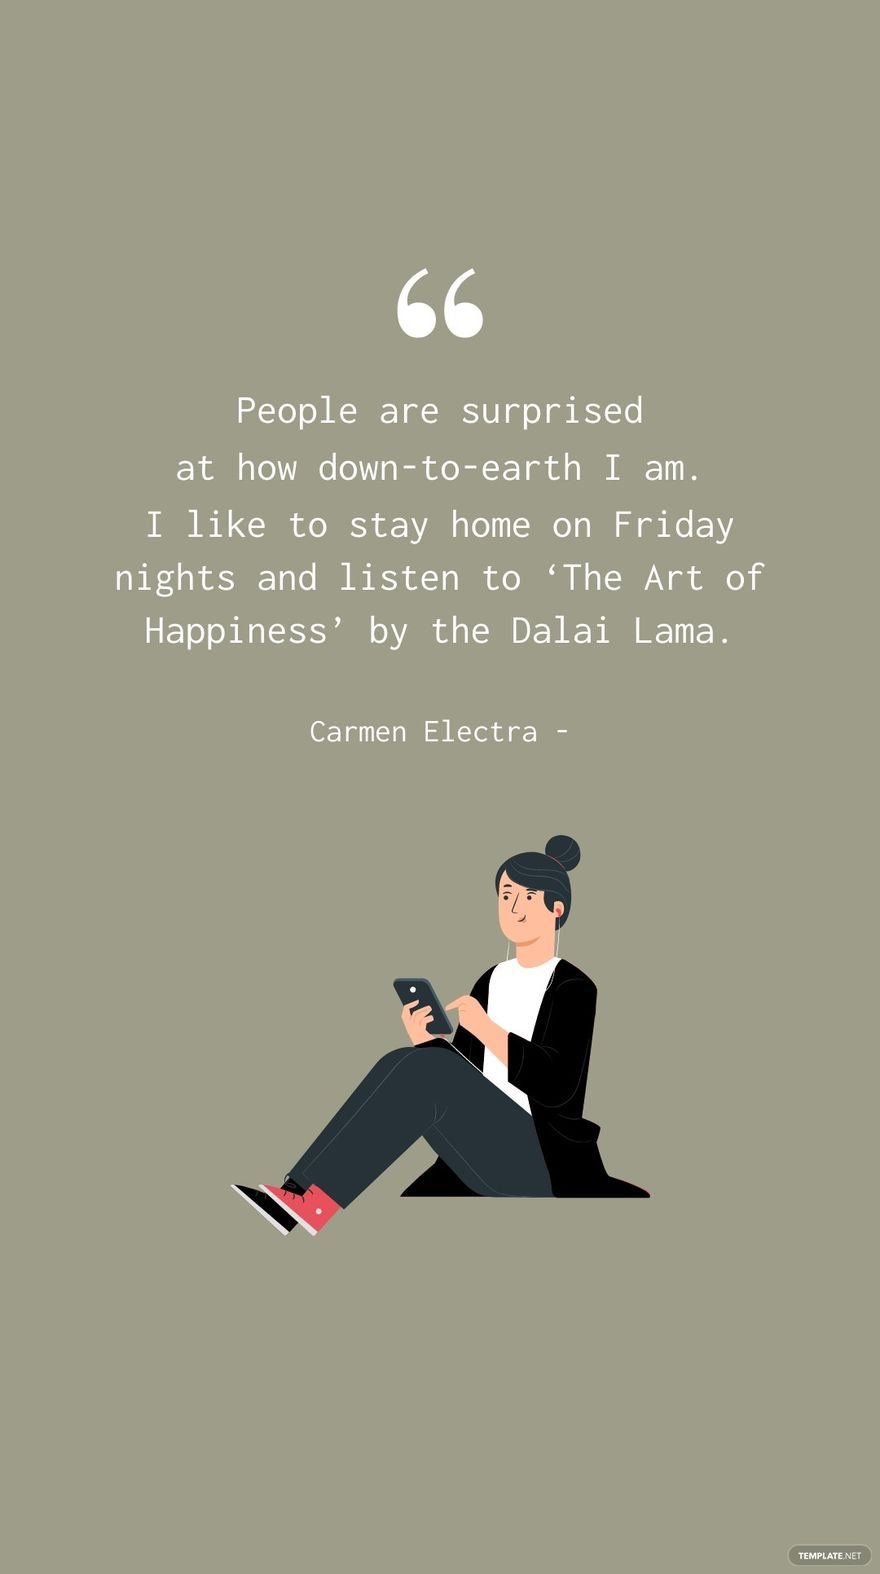 Carmen Electra - People are surprised at how down-to-earth I am. I like to stay home on Friday nights and listen to ‘The Art of Happiness’ by the Dalai Lama.